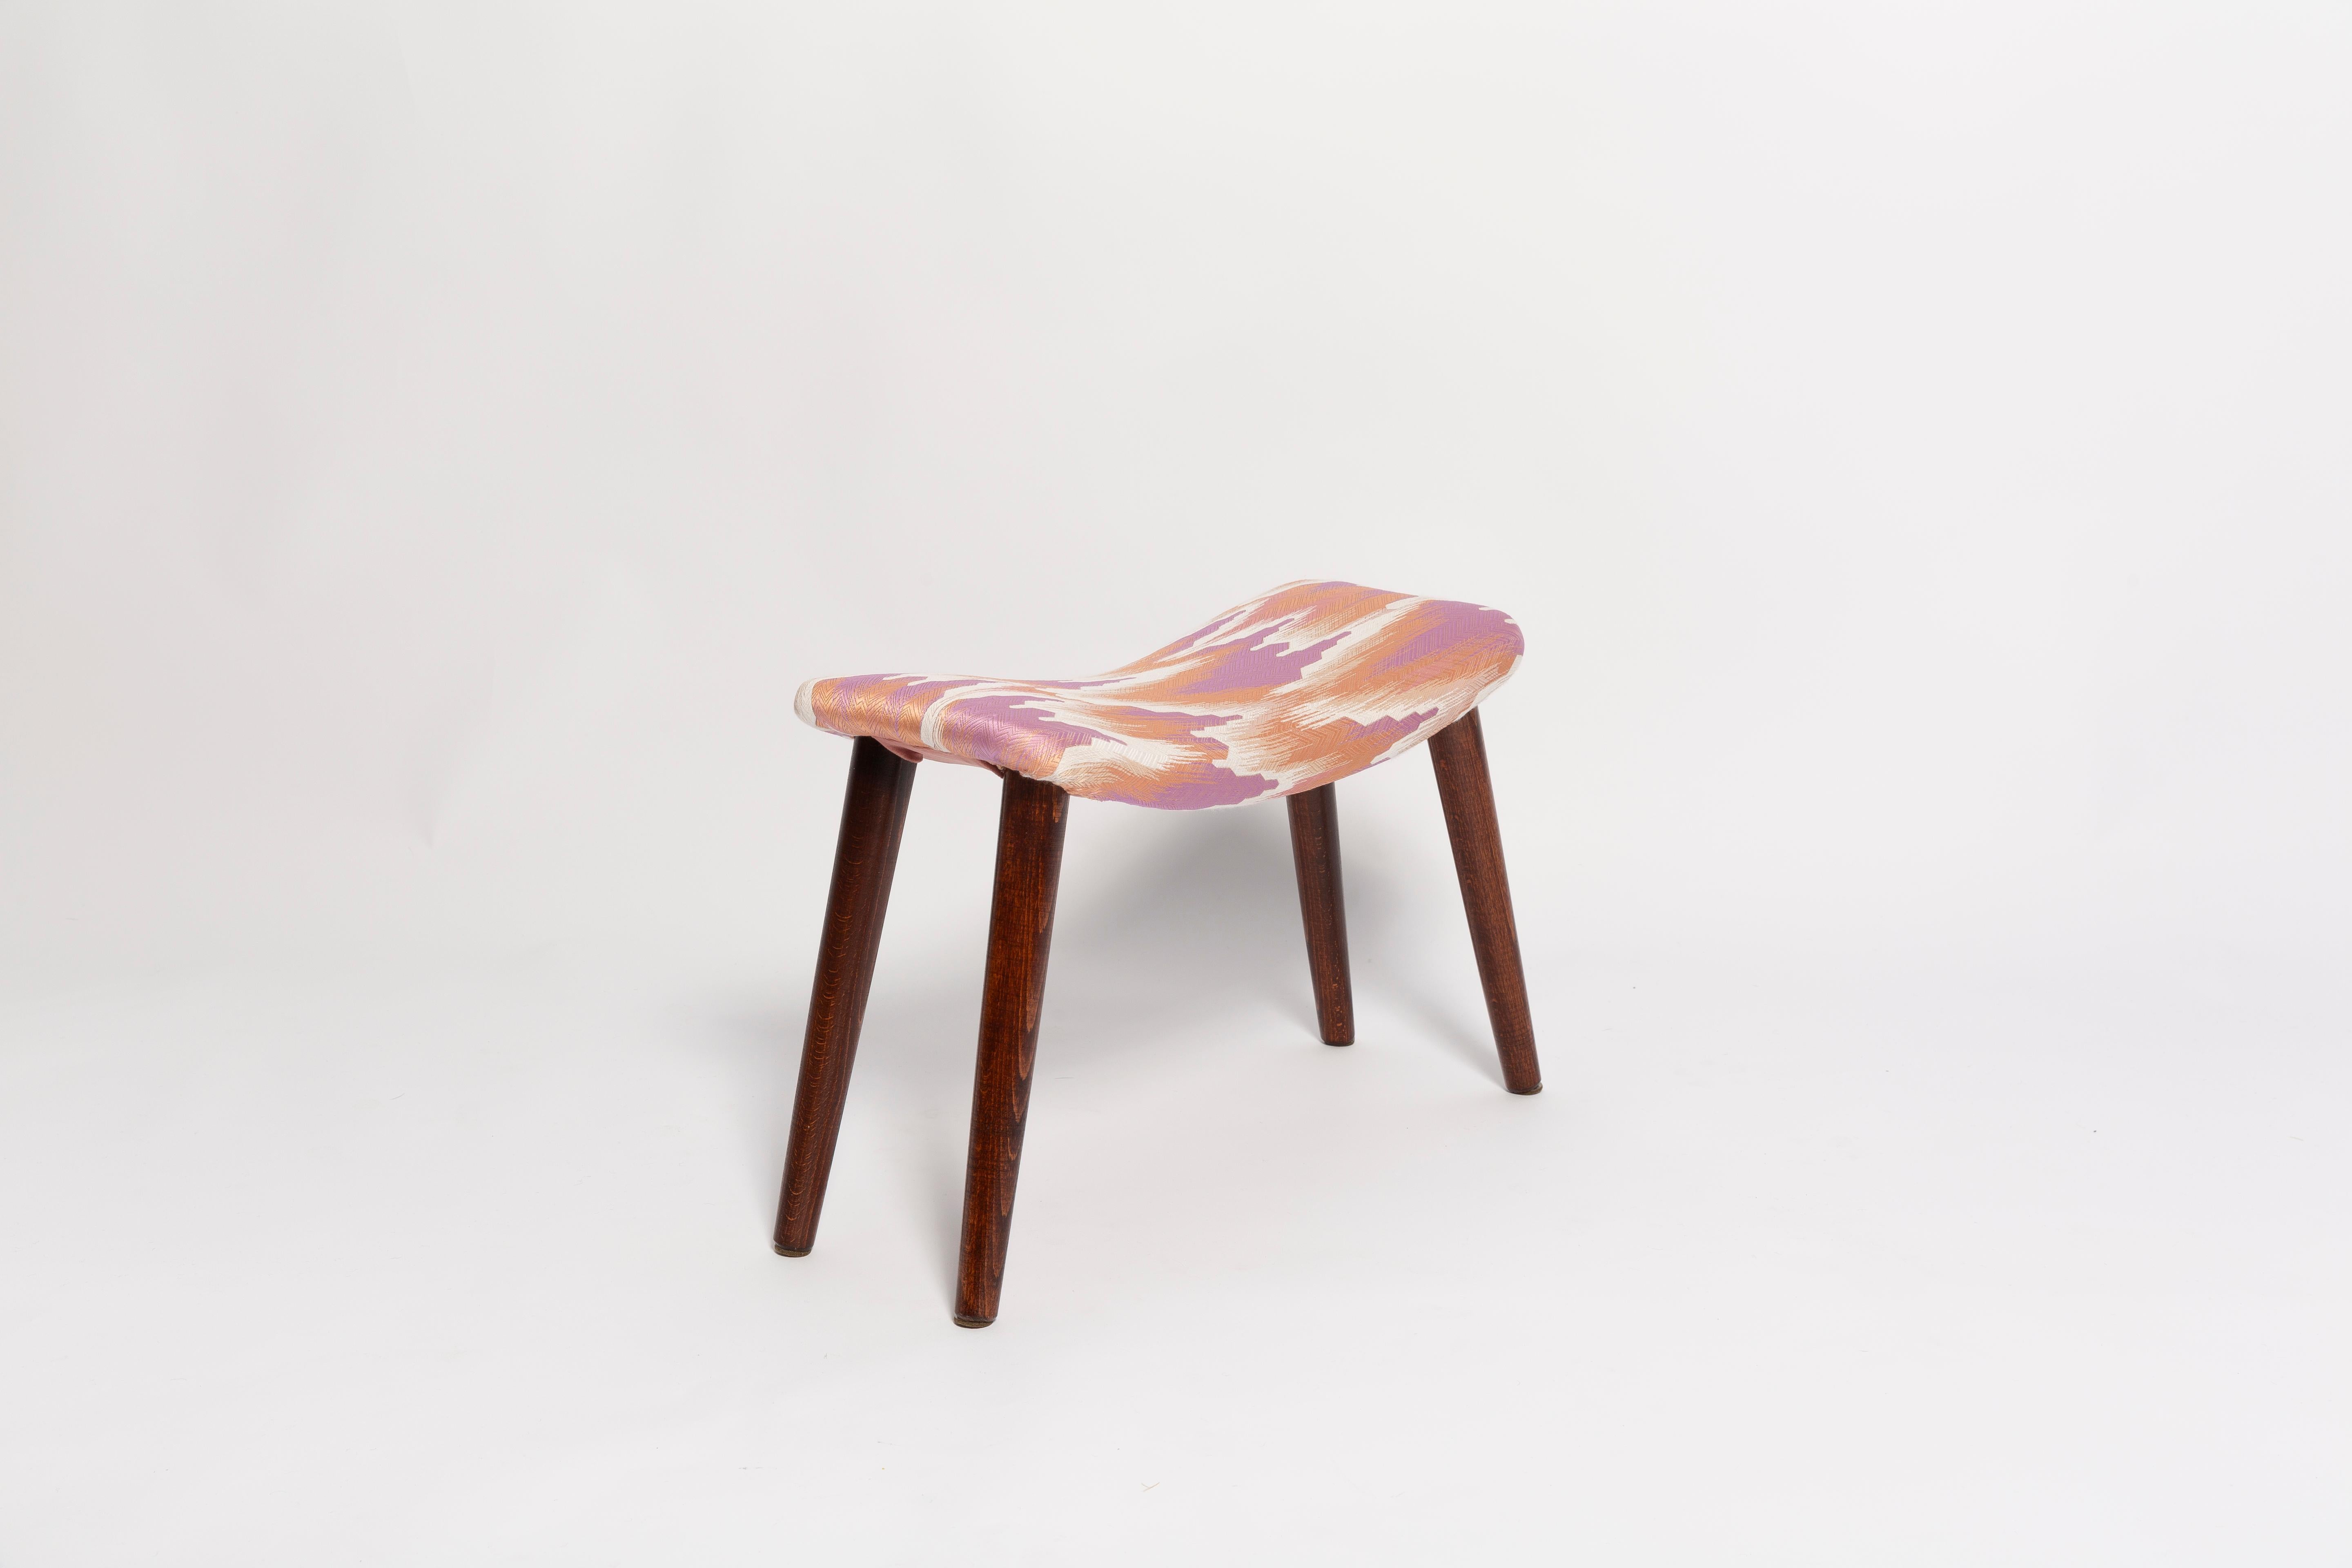 Small stool called 